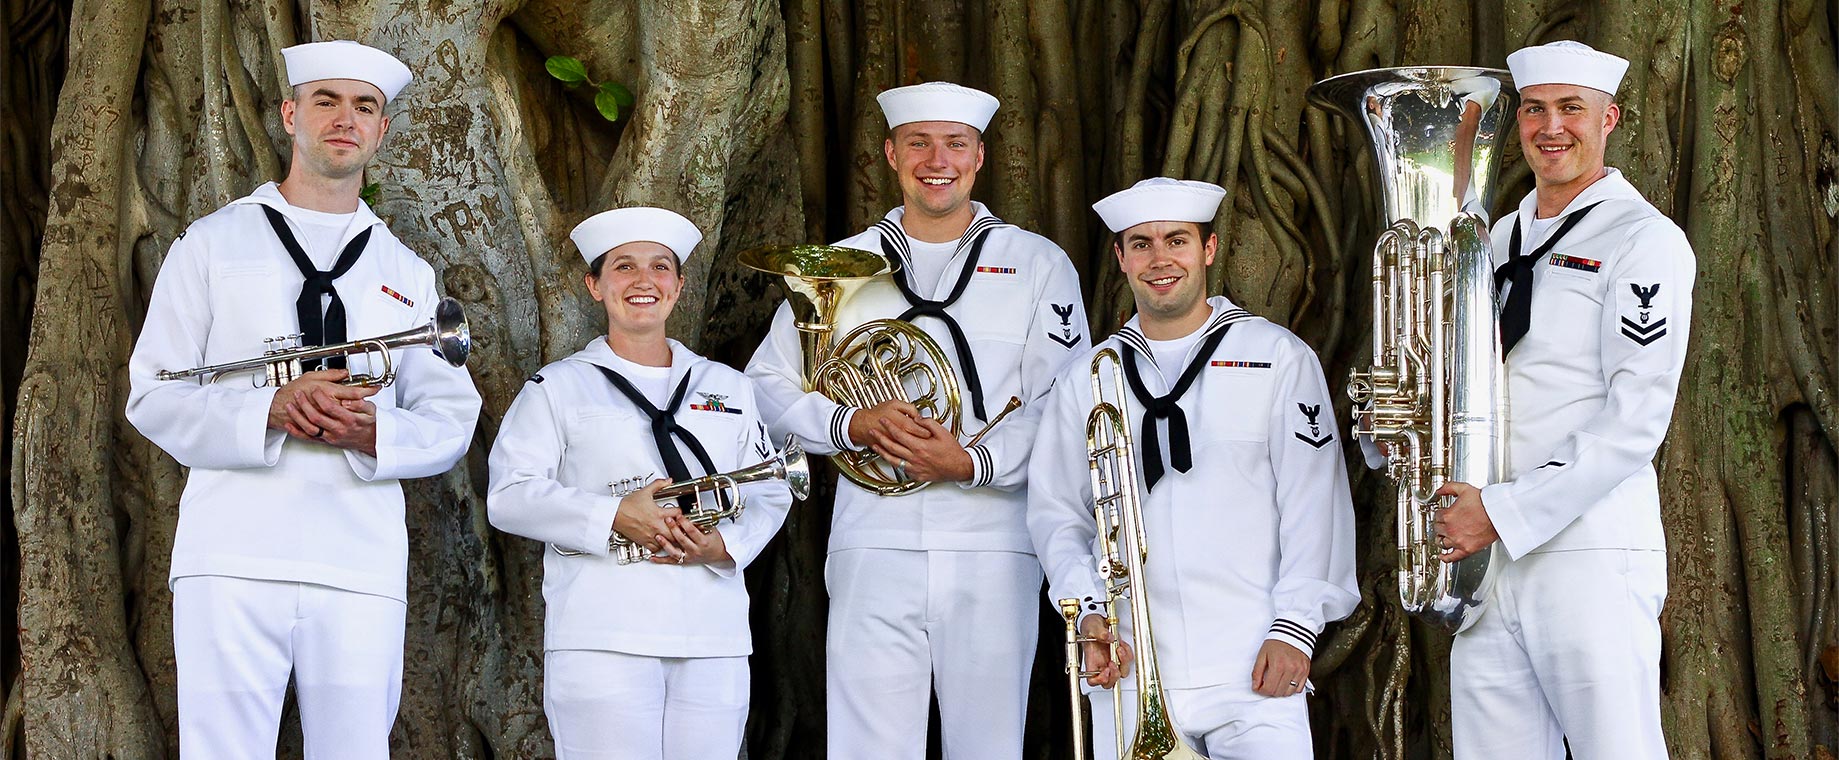 Five Sailors smile for the camera while holding musical instruments: two trumpets, a french horn, a trombone and a tuba.